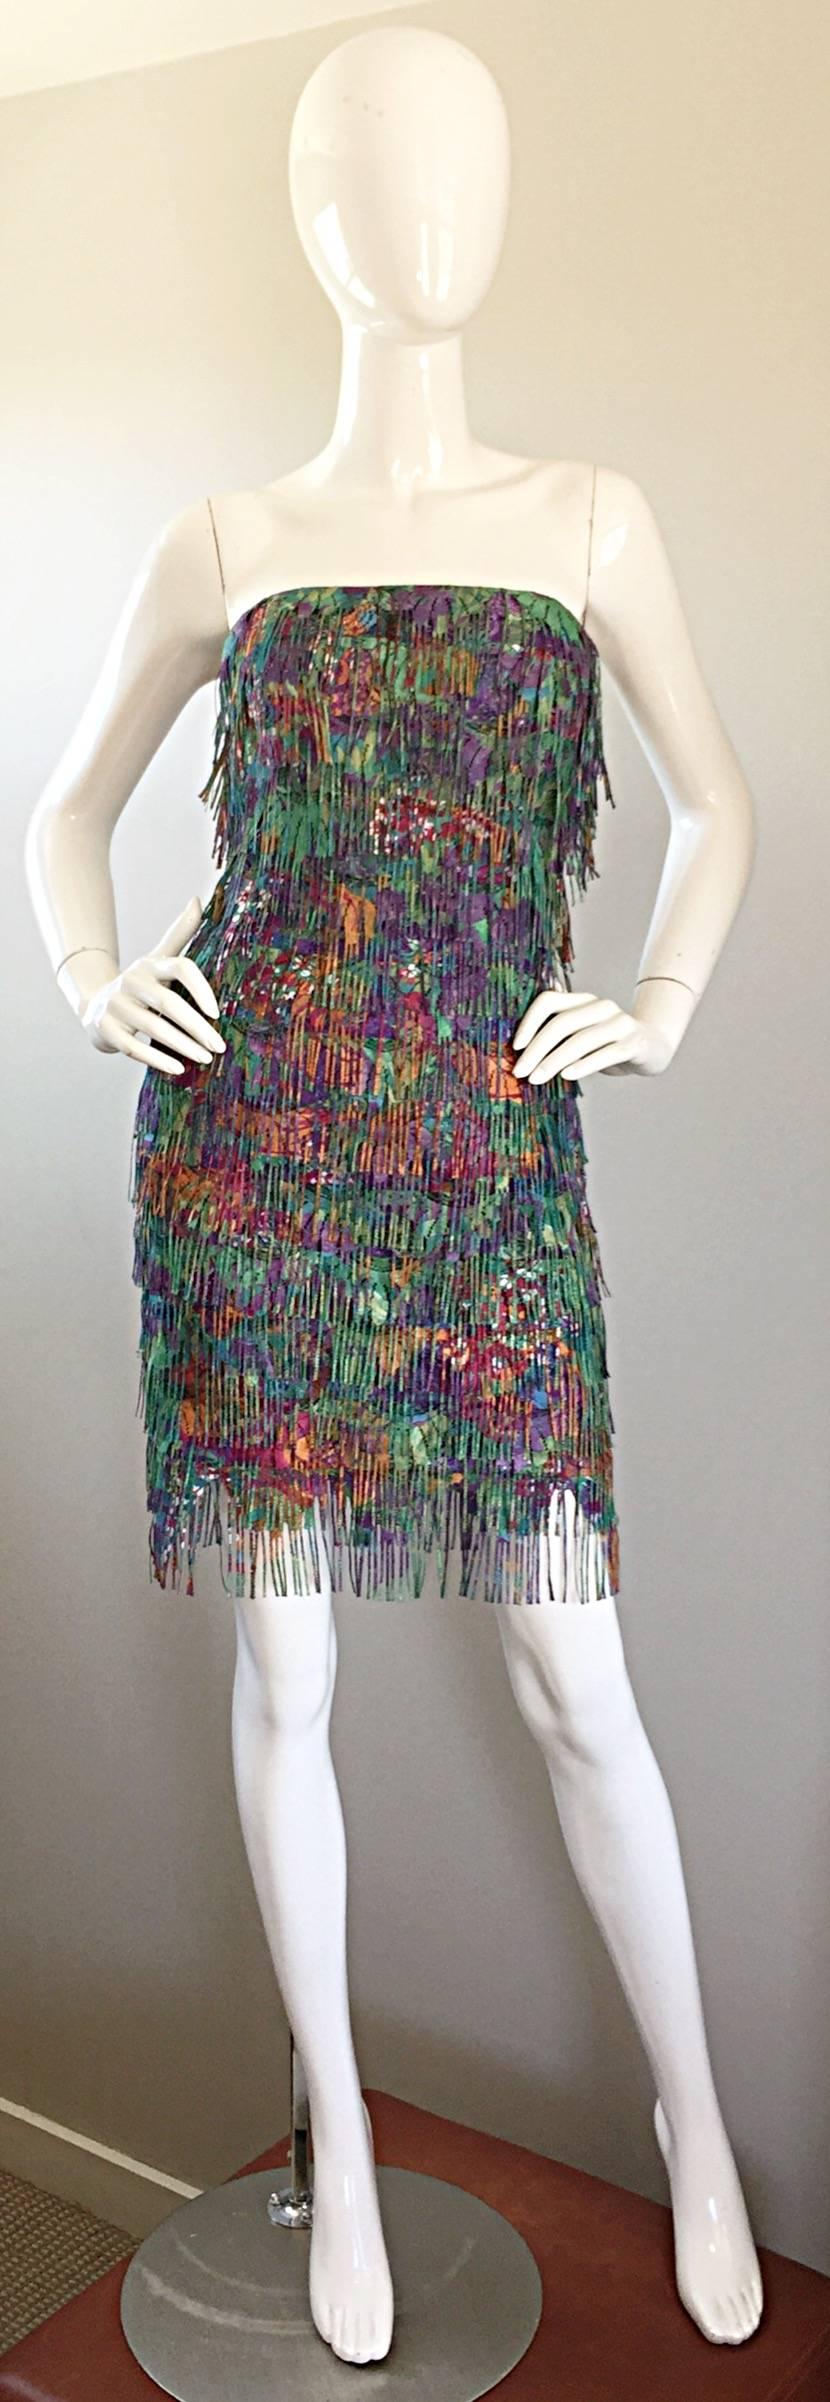 Incredible vintage PATRICIA RHODES colorful full fringed strapless dress! Amazing construction with heavy attention to detail! Features practically every color of the rainbow, with allover French lace, with tiered fringed overlay. Looks wonderful